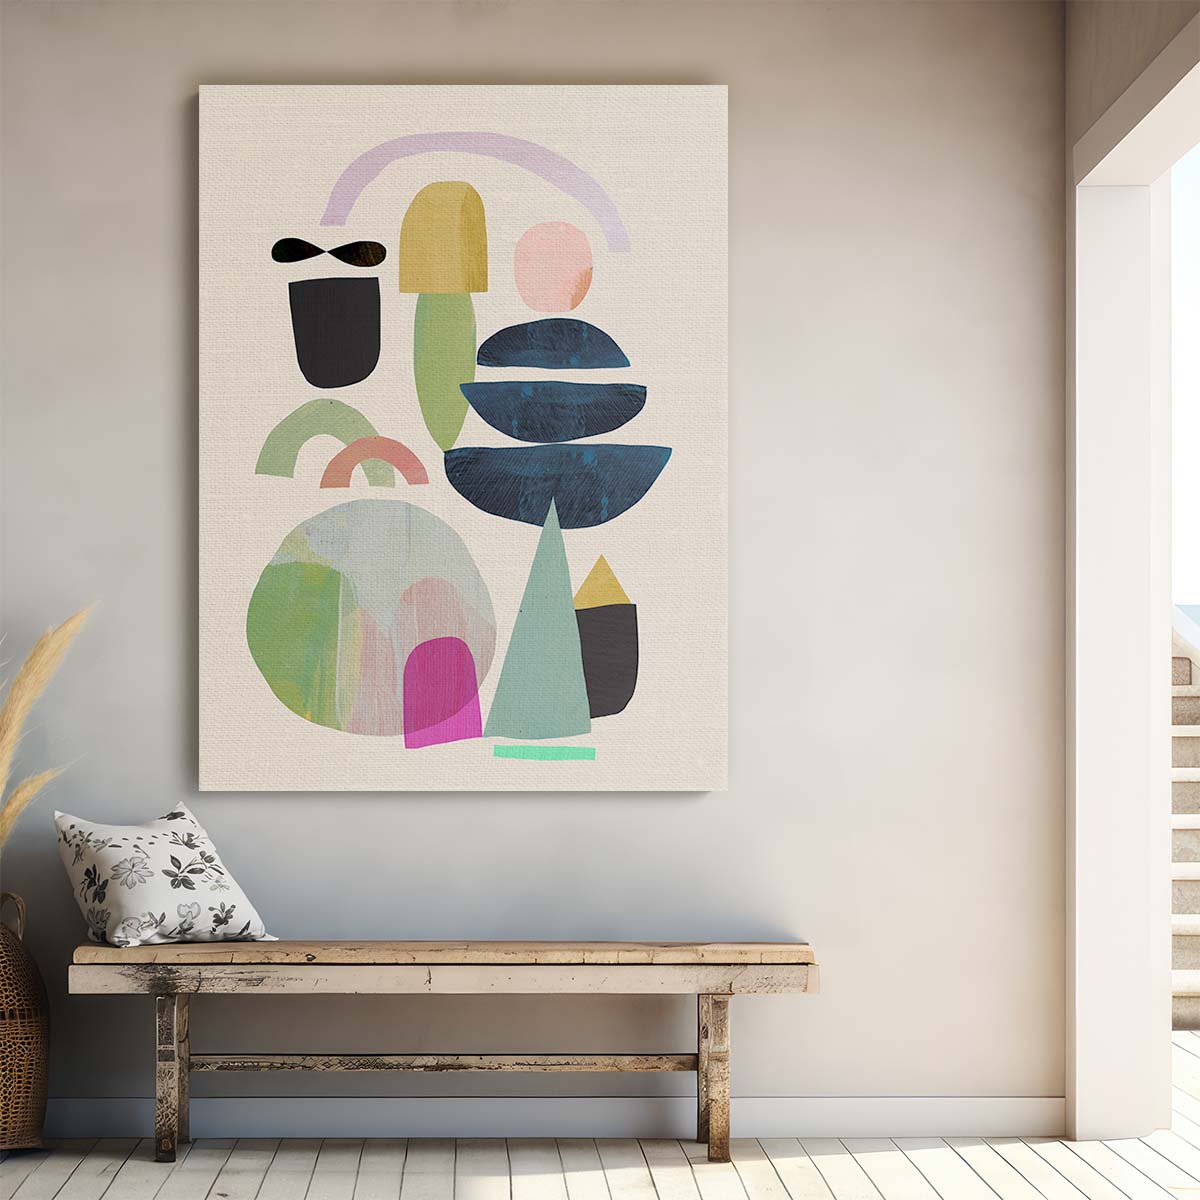 Colorful Abstract Illustration 'Nord No3' by Dan Hobday by Luxuriance Designs, made in USA